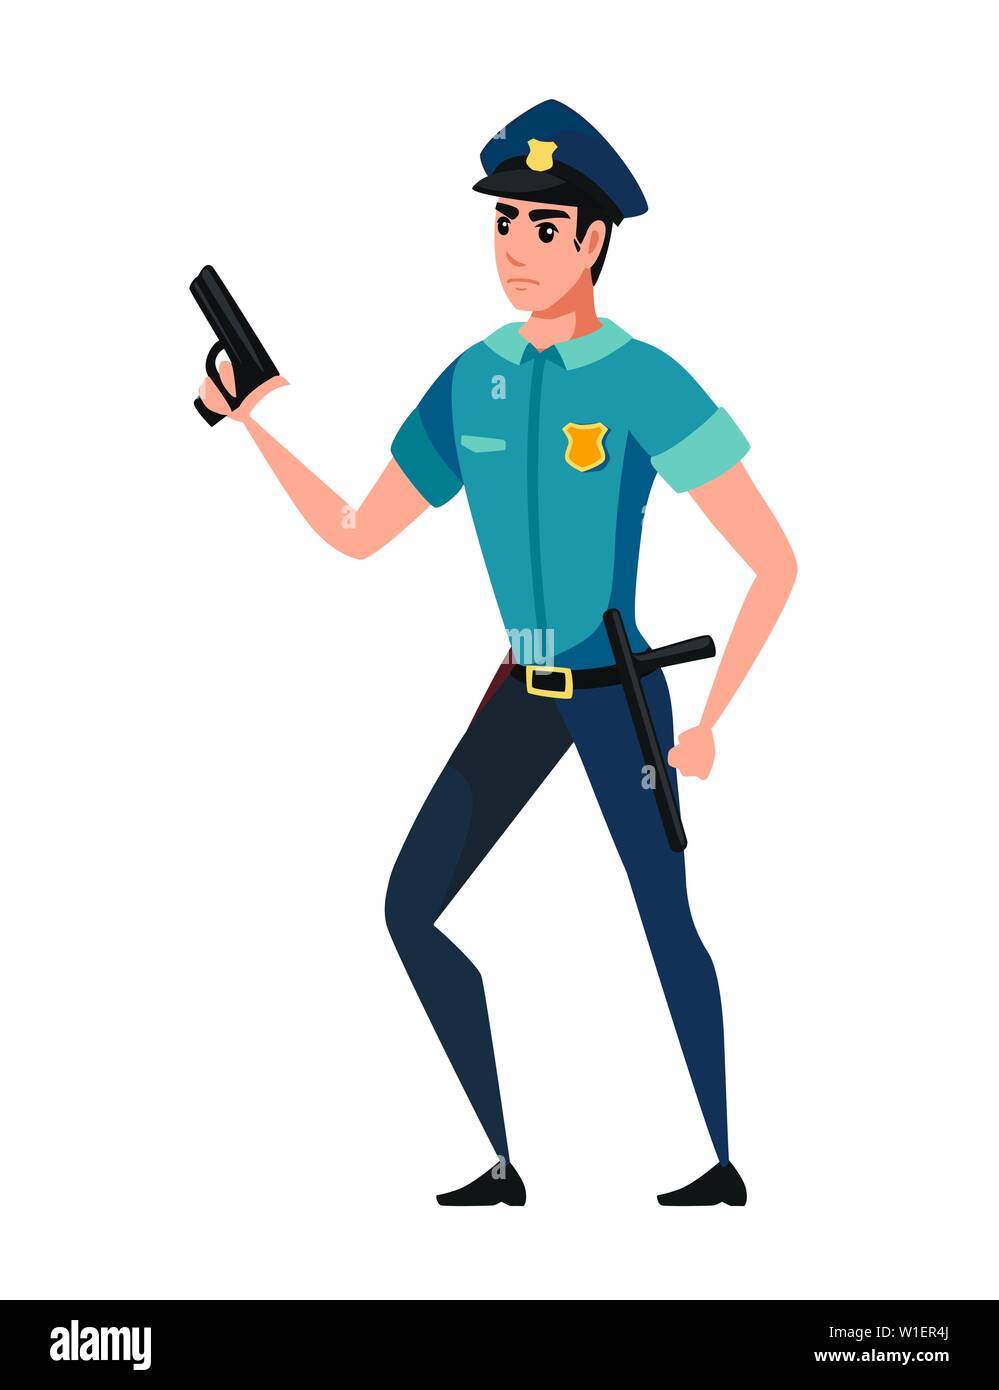 Police officer hold the weapon and wearing dark blue pants light blue shirt cartoon character design flat vector illustration. Stock Vector